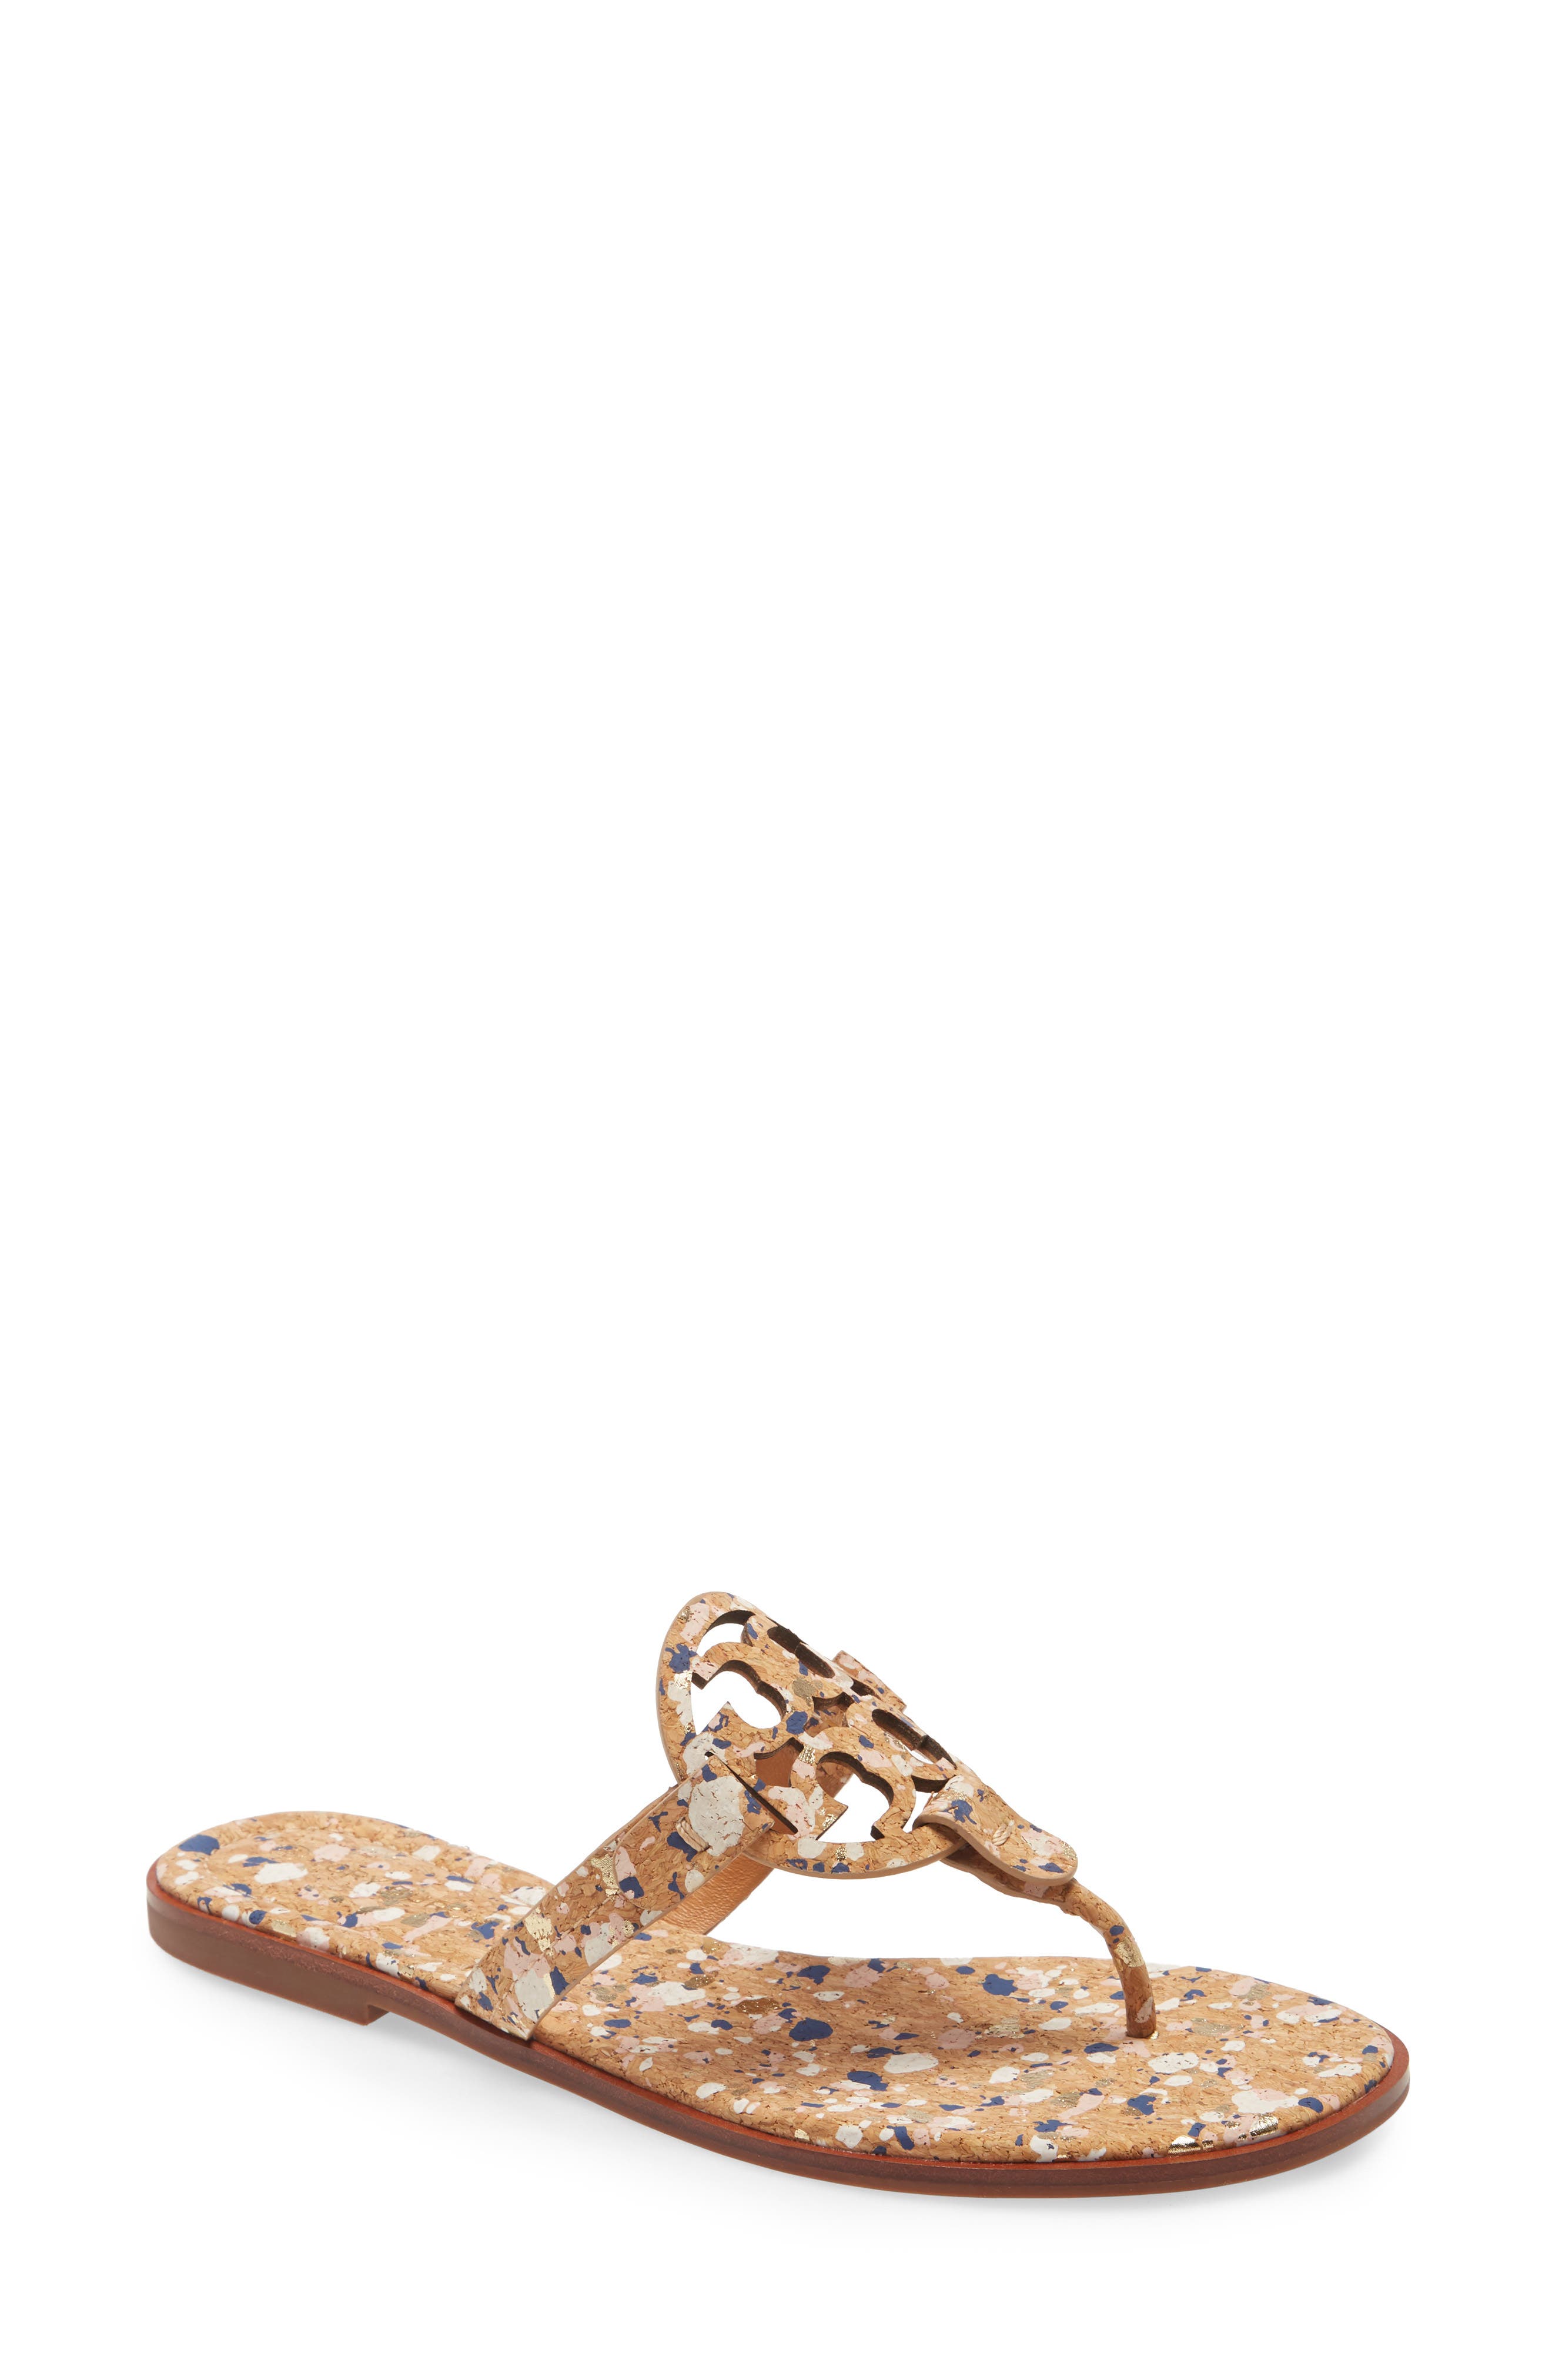 tory burch gold sandals nordstrom